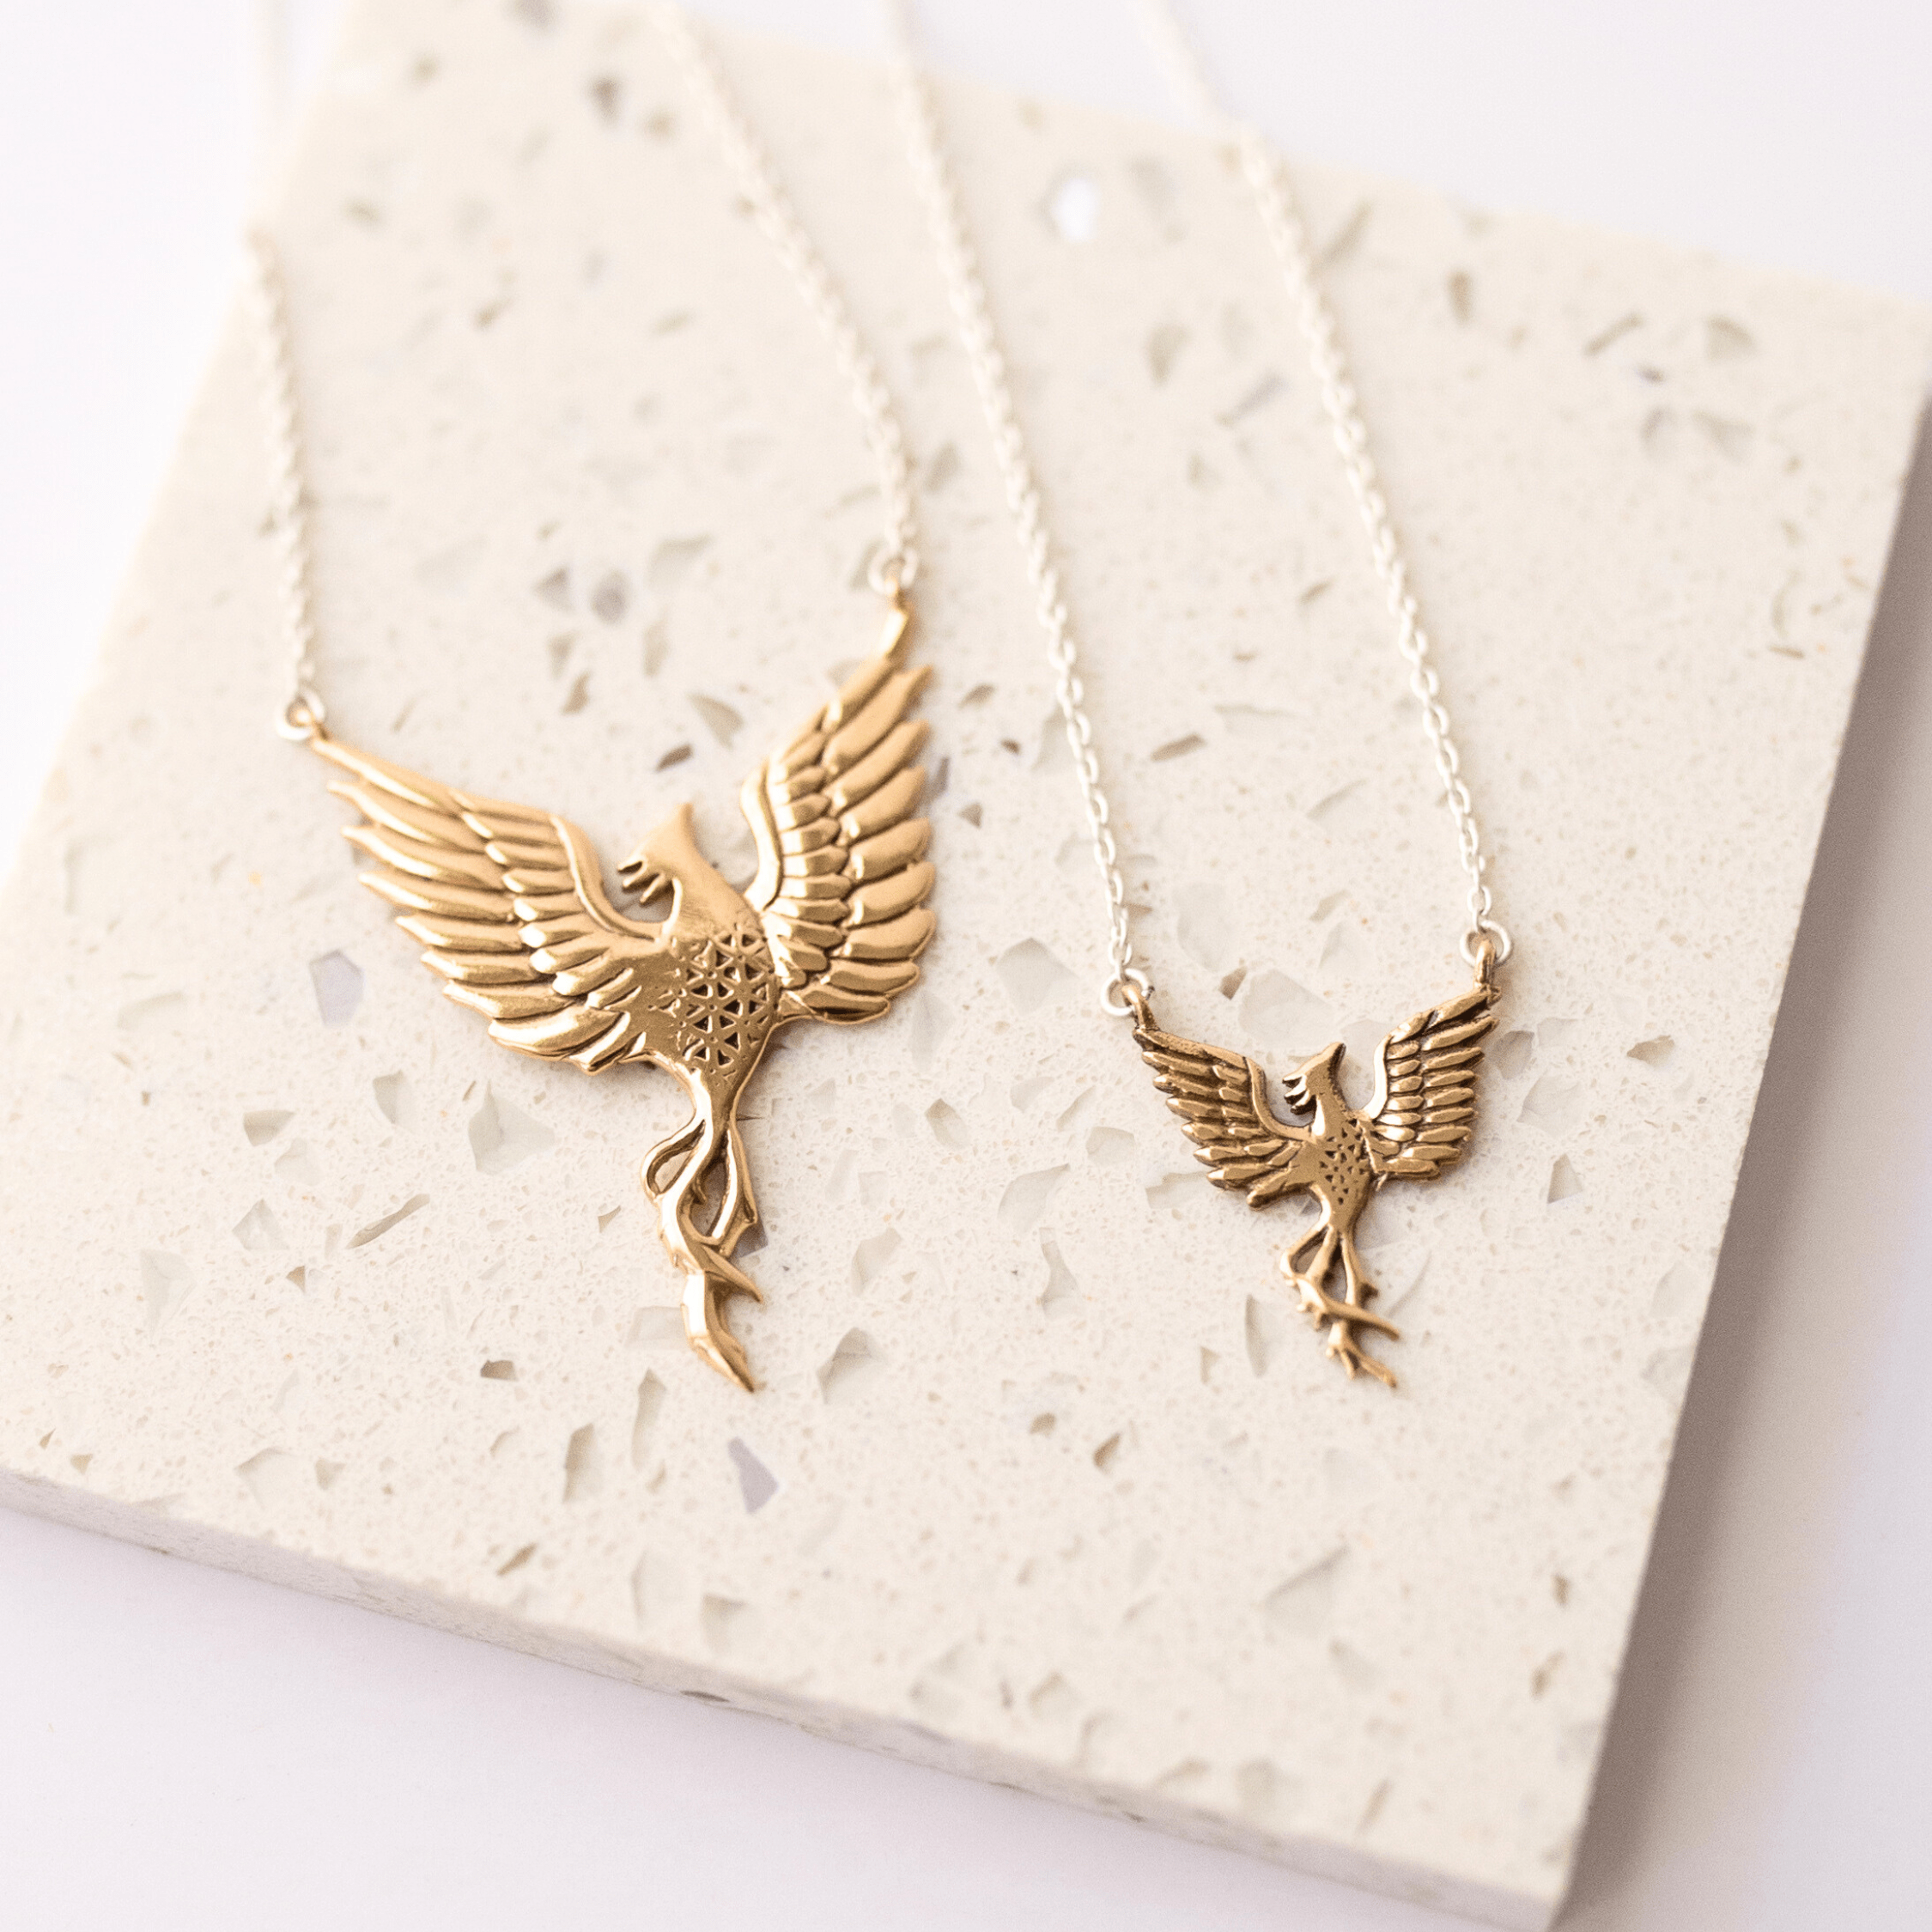 Jewelry Evolution Necklace Phoenix "Rise Strong" Petite Necklace